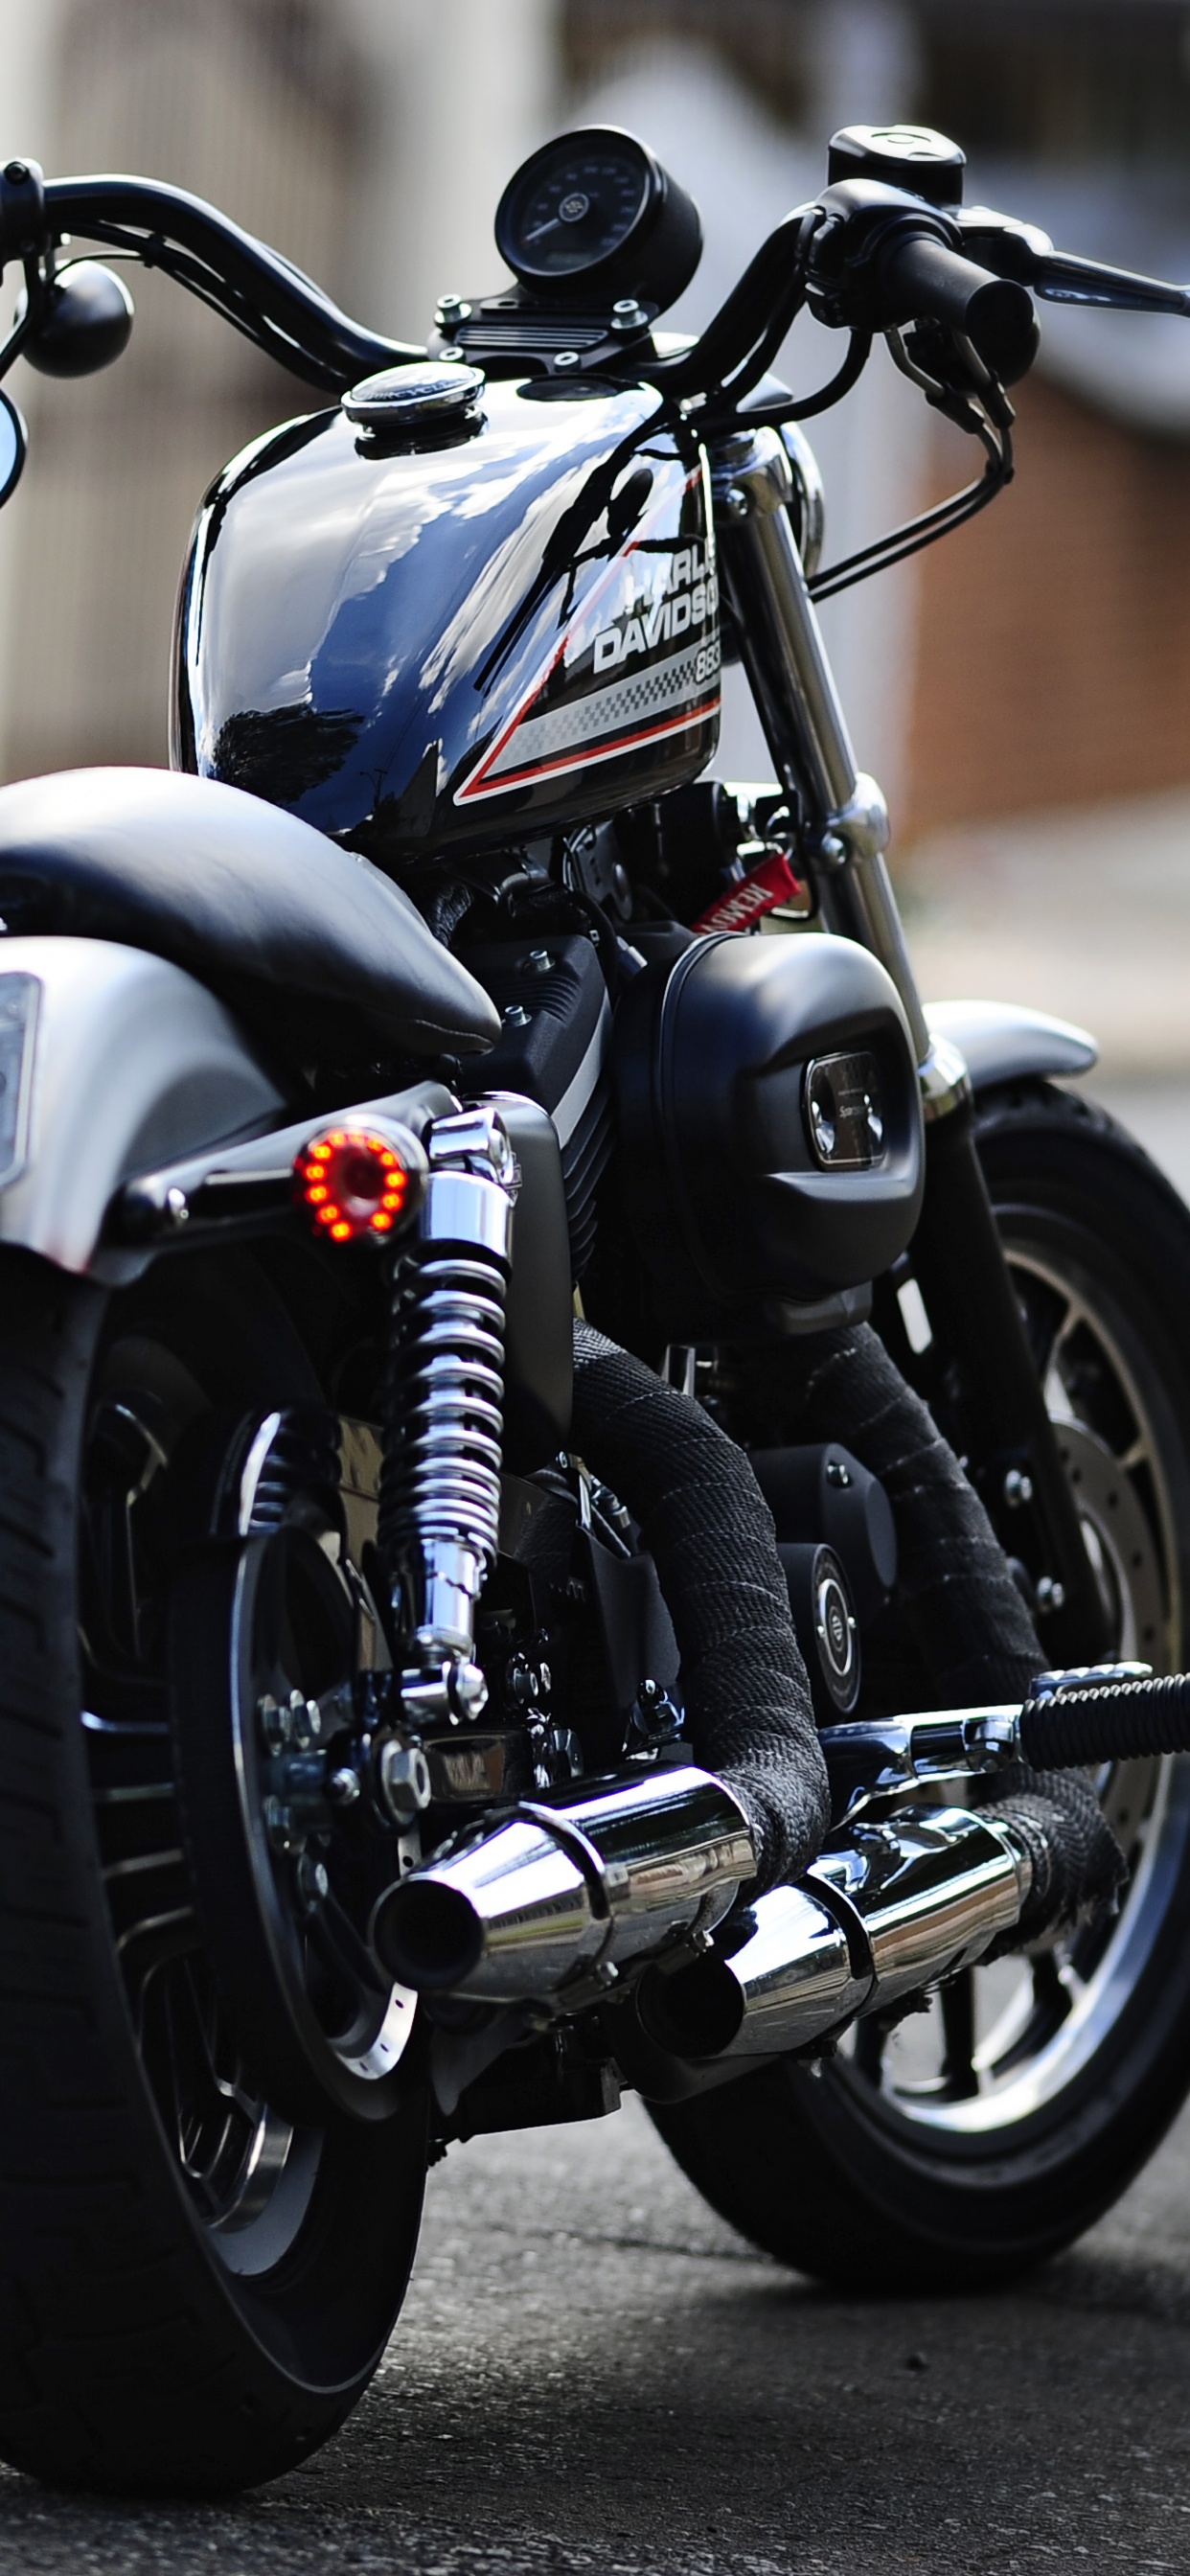 Black Cruiser Motorcycle on Road During Daytime. Wallpaper in 1242x2688 Resolution